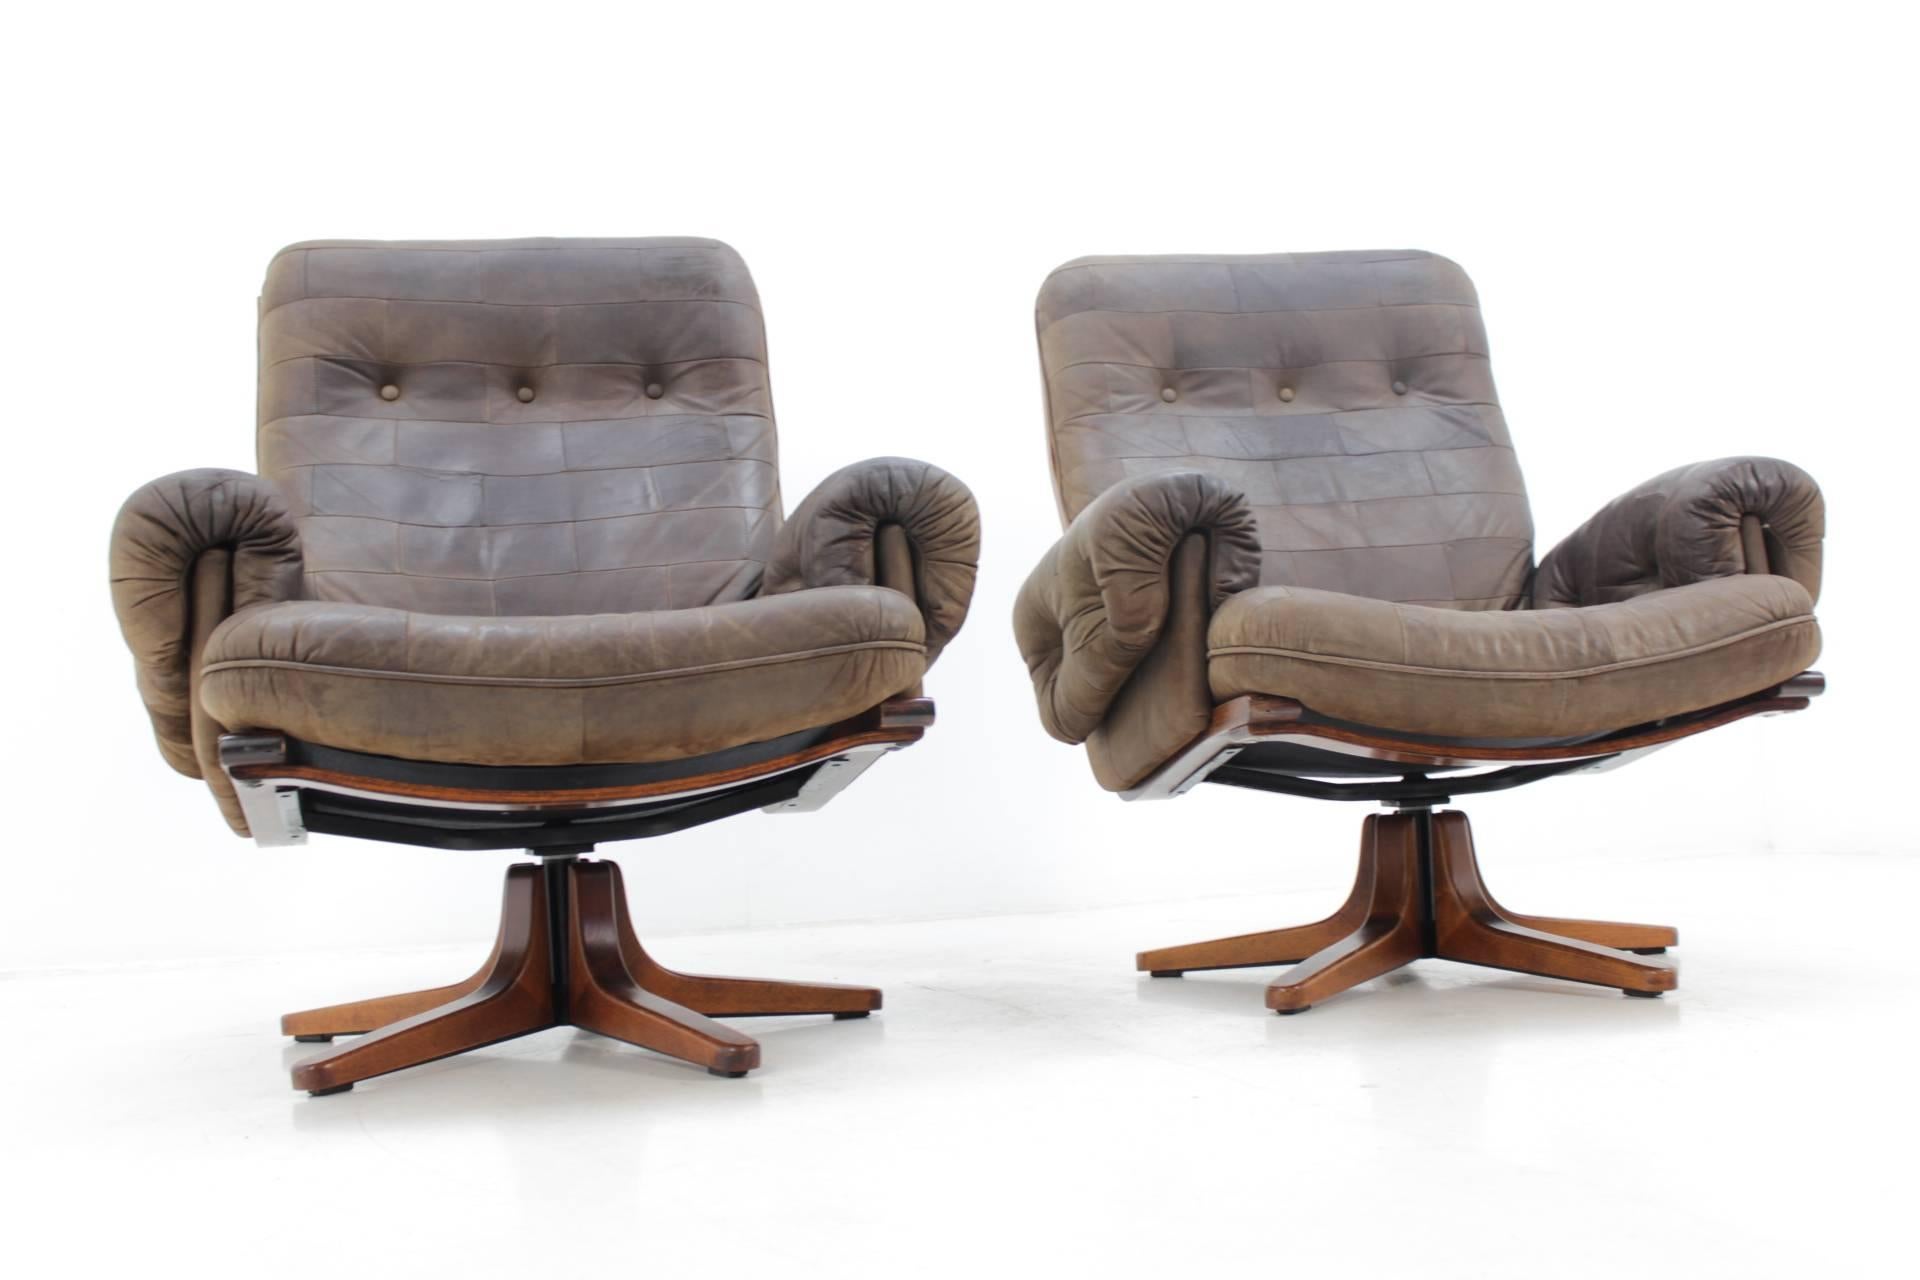 - 1970s
- Scandinavia, maybe Norway
- bentwood, leather
- very good condition
- armrests with patina
- completely revived.